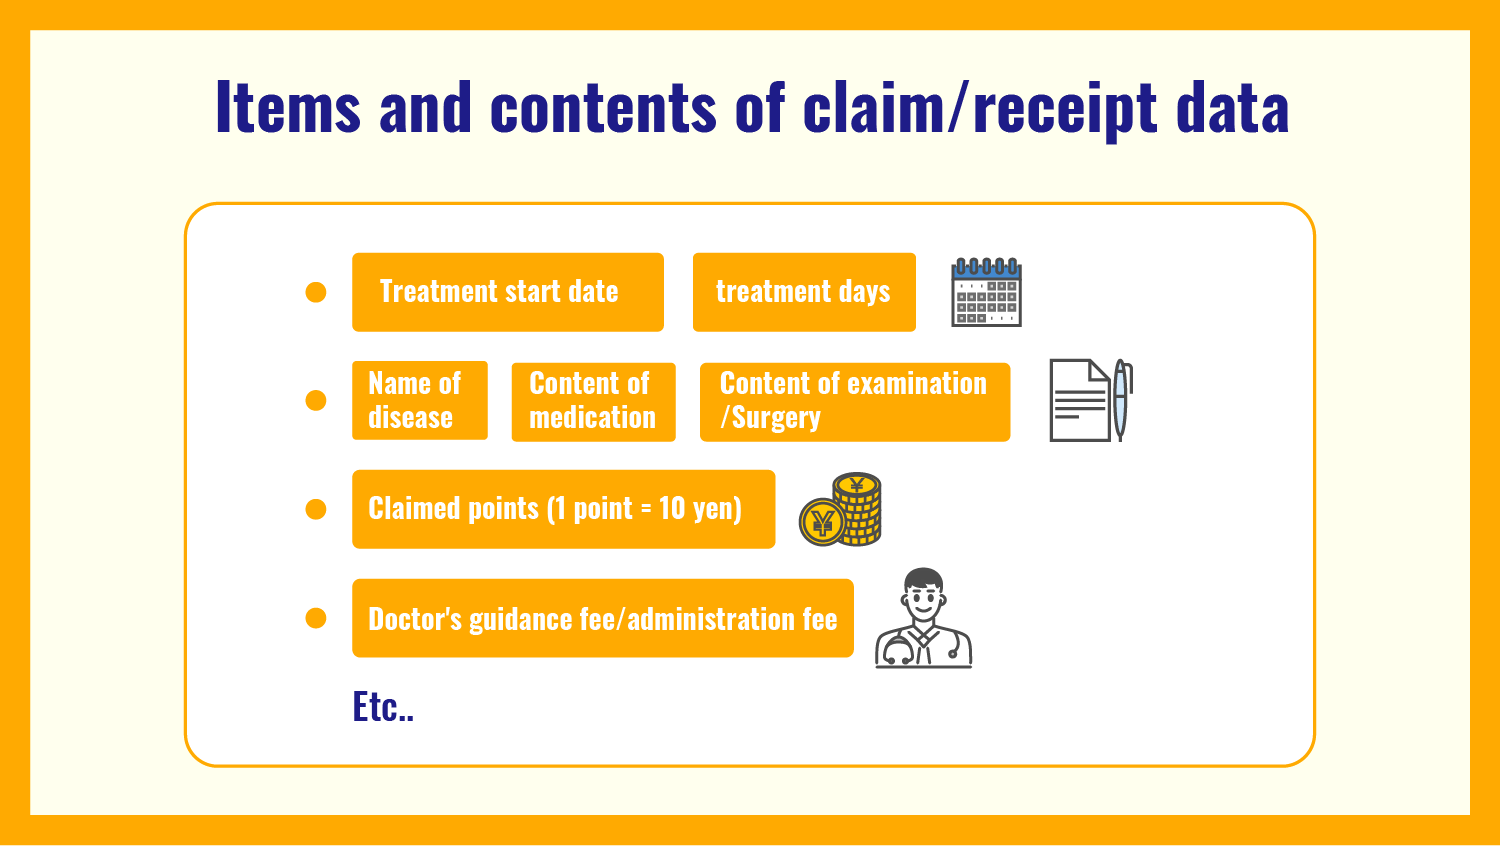 Items and contents of claim / receipt data